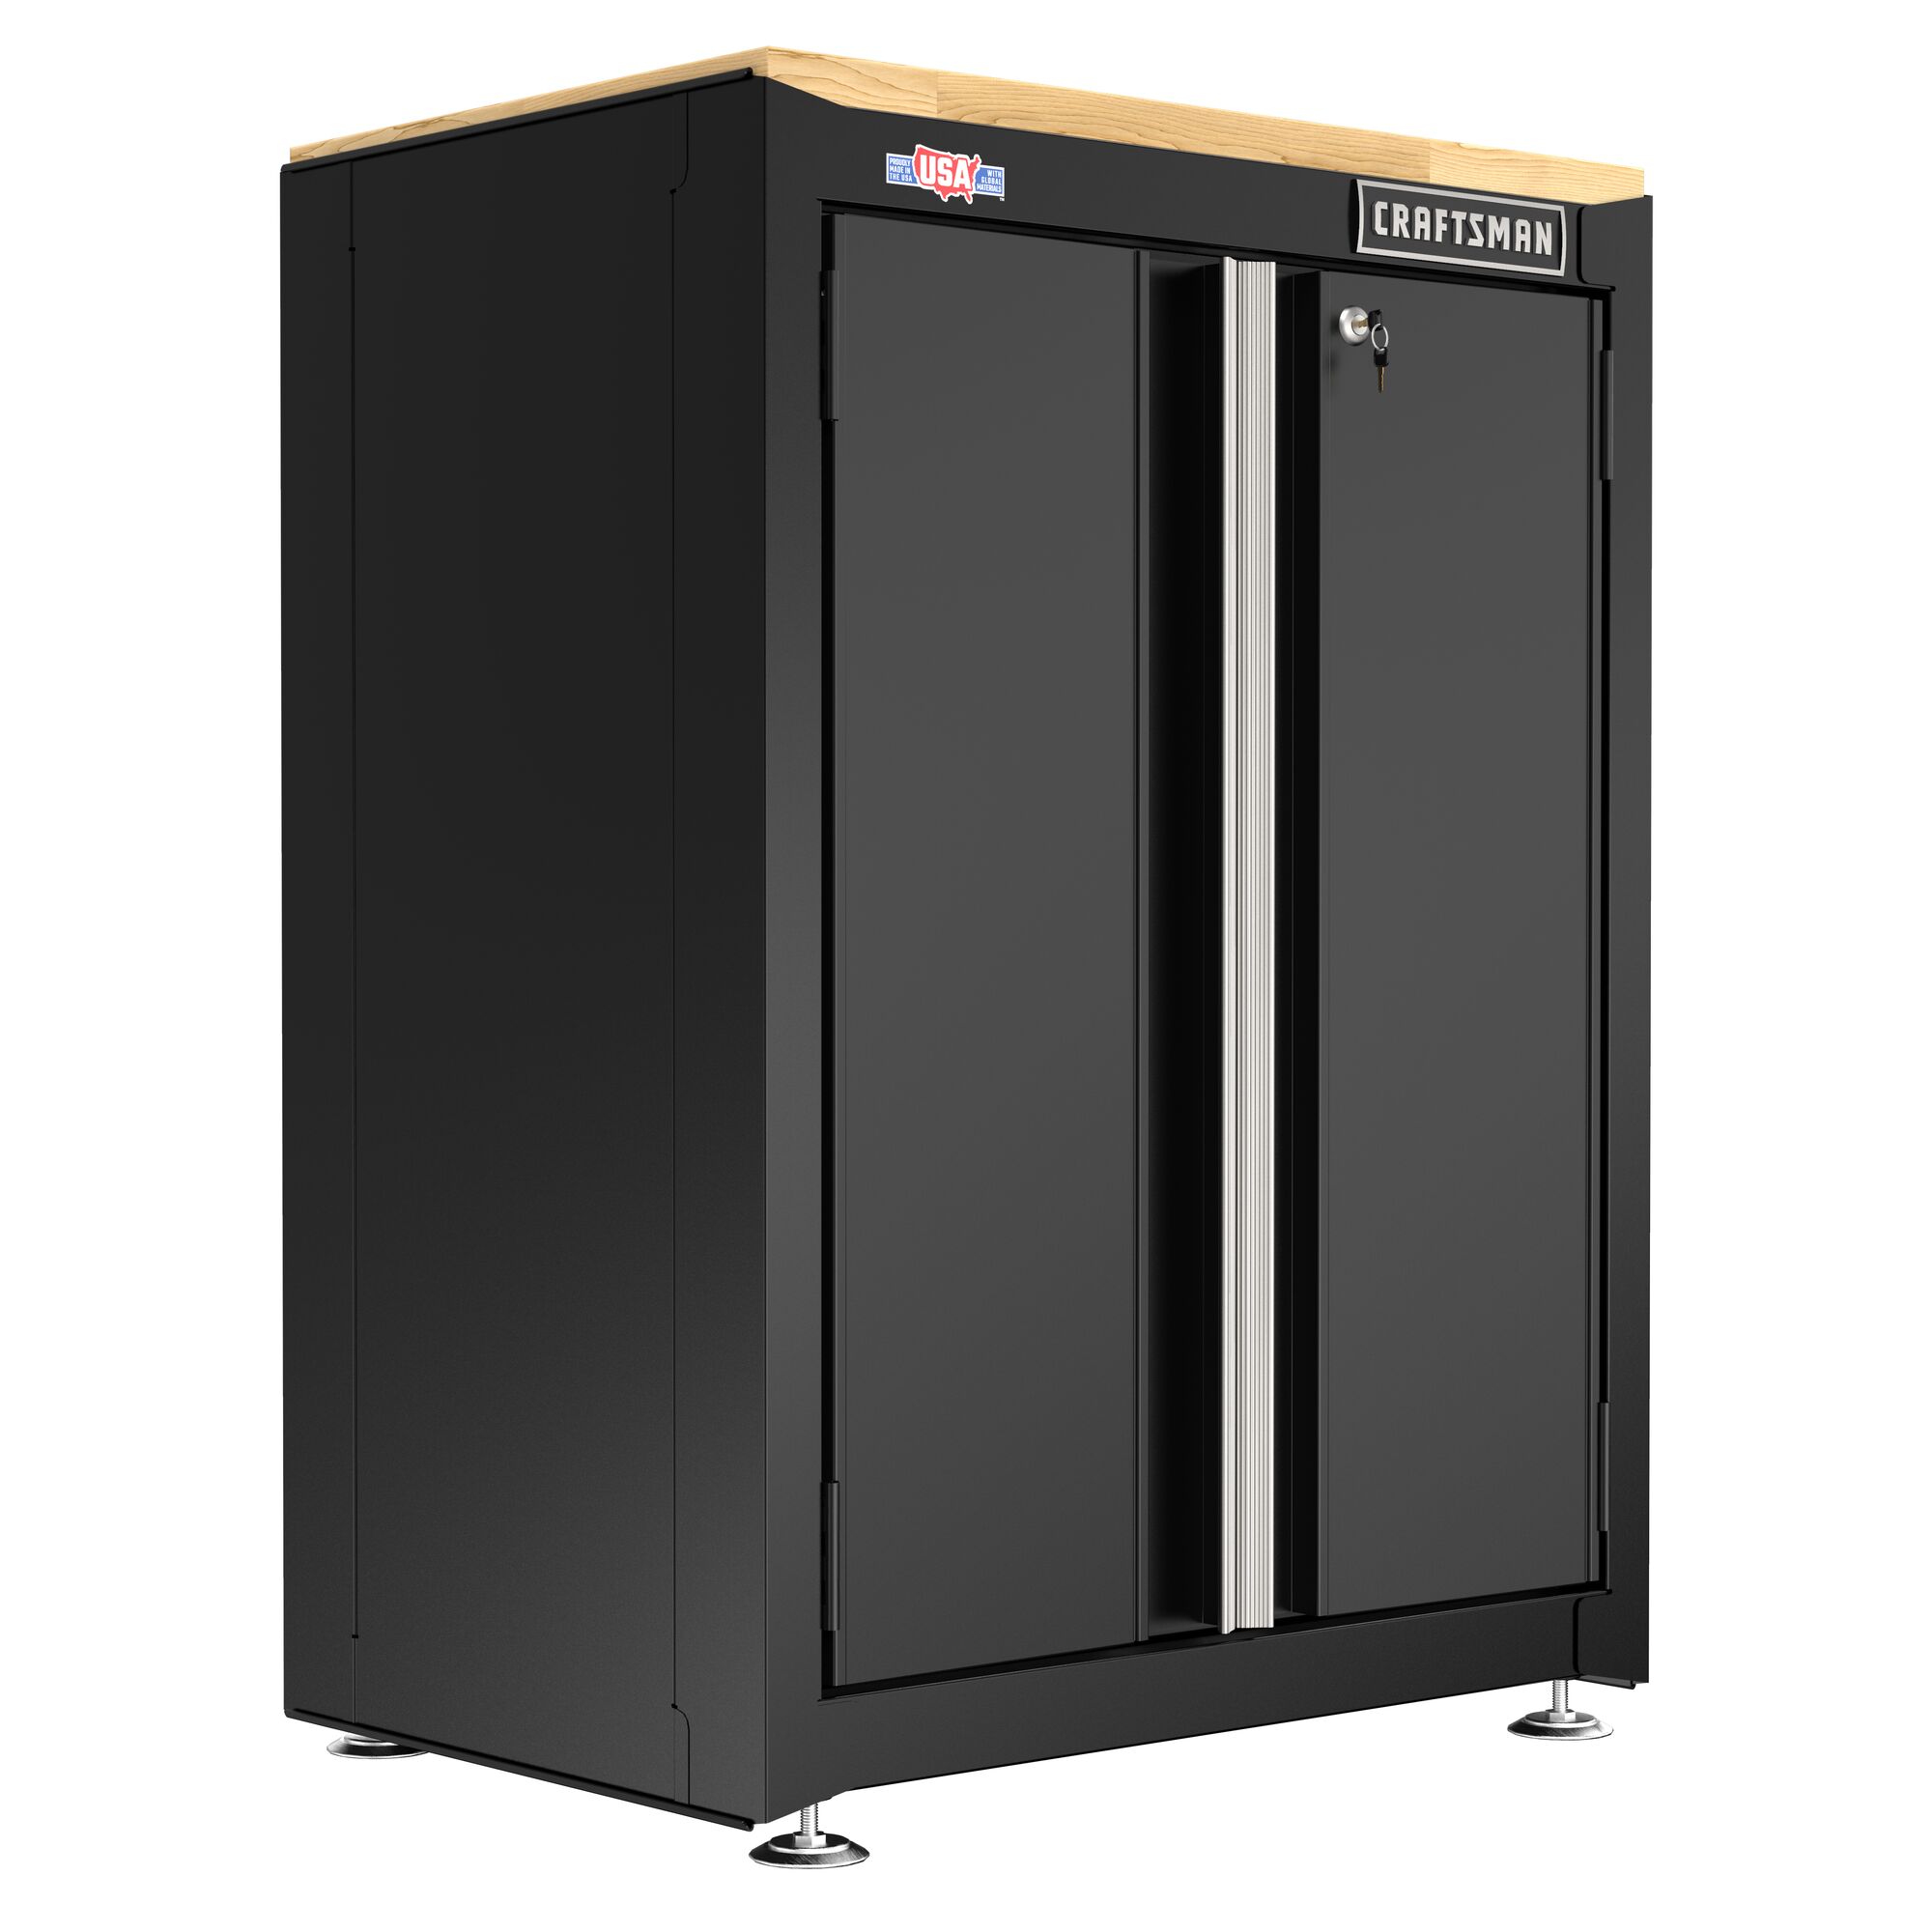 CRAFTSMAN 26.5-in wide 2-door base cabinet angled view